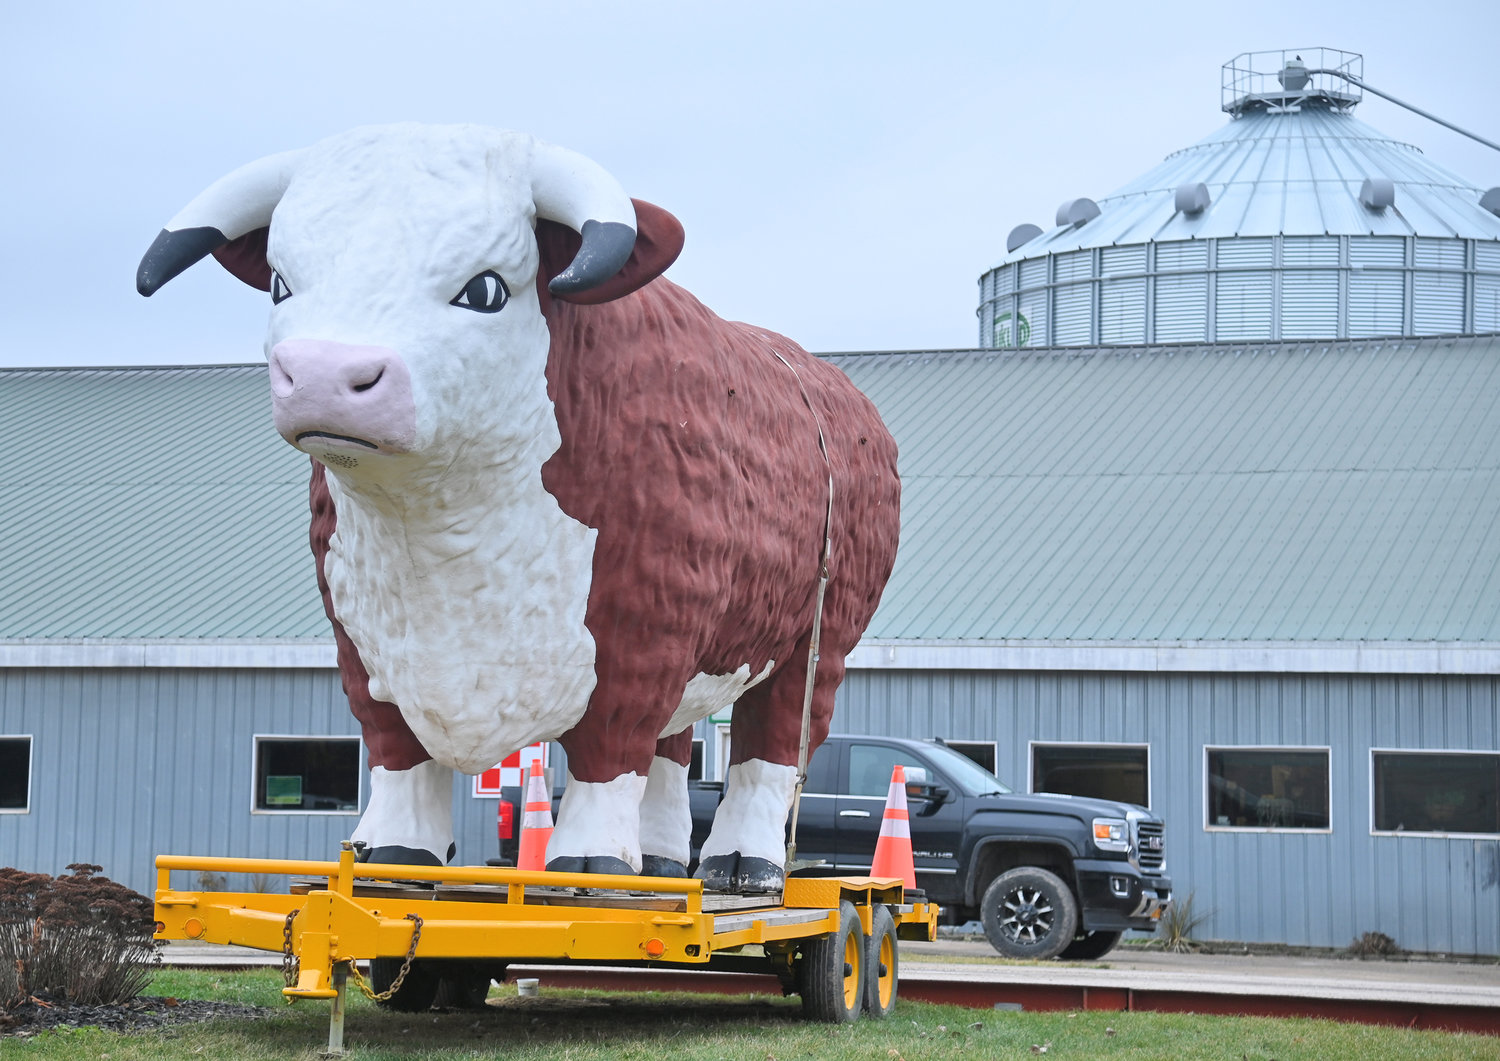 The former Joel’s Steakhouse bull, “Lucky,” stands in front of Richardson Farms on Skinner Road in Vernon Center on Monday, Jan. 9. Seven years ago, on Sunday, Jan. 10, 2016, Lucky survived a fire that destroyed the Stampede Steakhouse and Saloon, which followed Joel’s Steakhouse at the site at the corner of Route 365 and Route 31 in Verona.  Today, Lucky is mostly a homebody, on his flatbed perch on the farm, though Lucky has made a few appearances, fitting his iconic status over the past few years, most notably at the Boonville-Oneida County Fair in 2019.